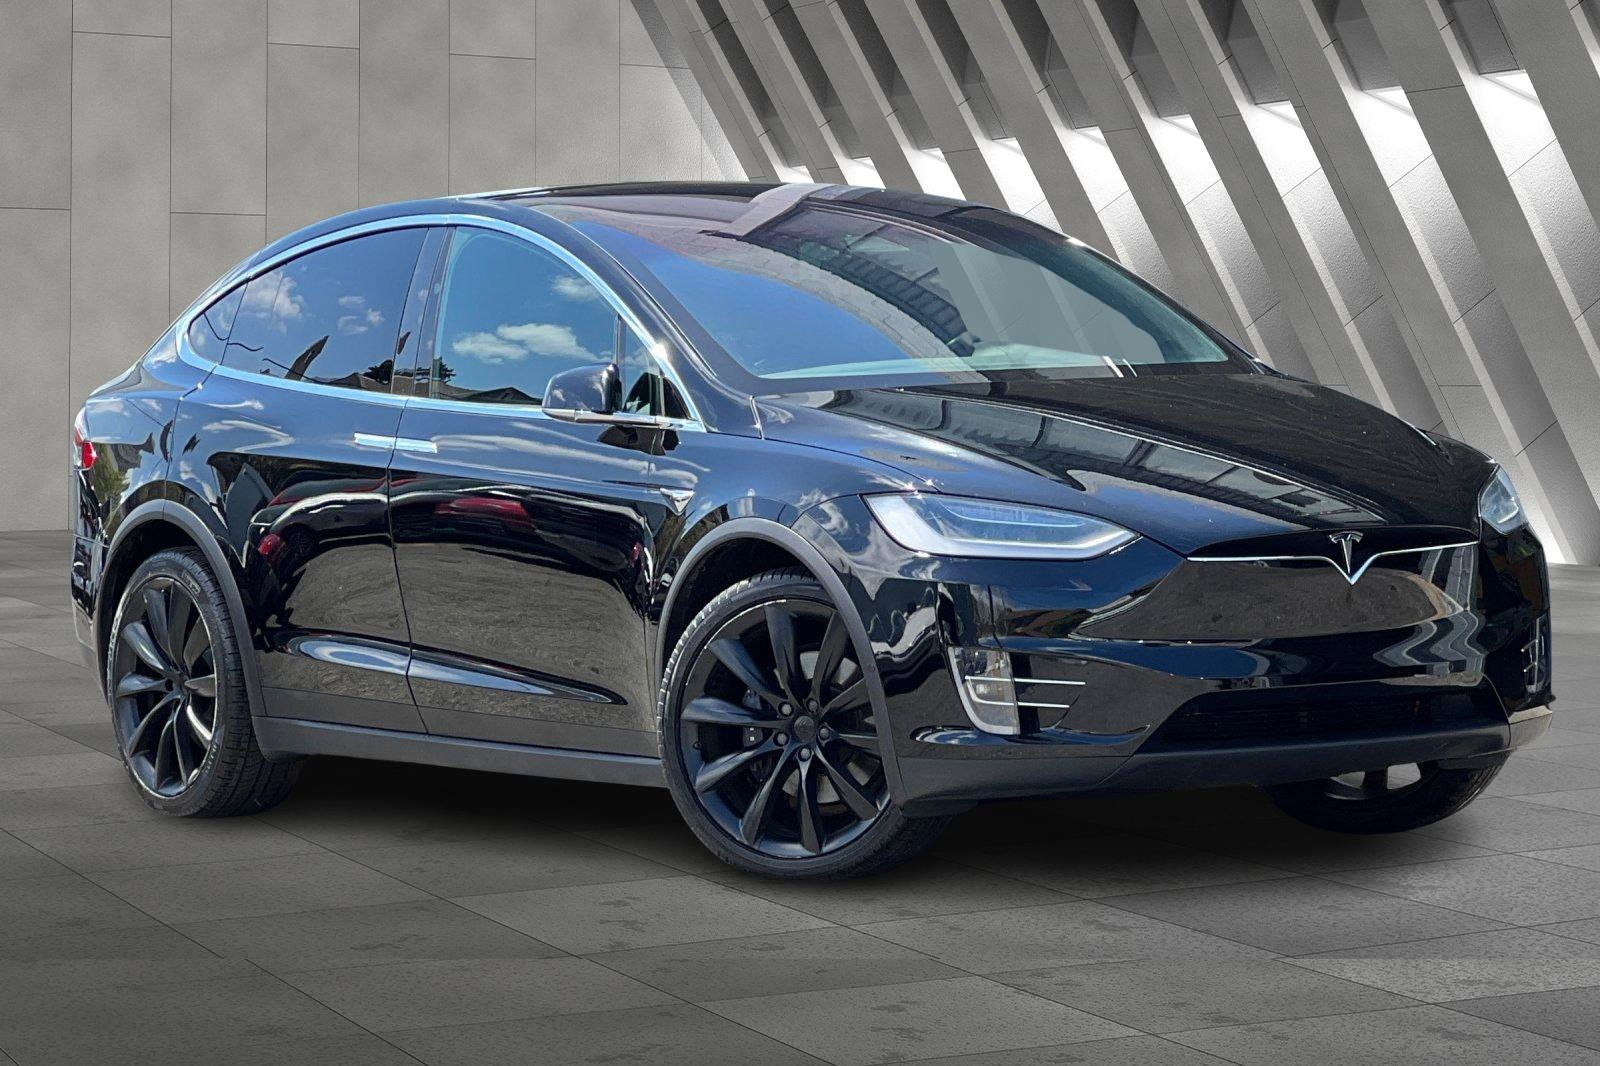 Used 2020 Tesla Model X Long Range Plus with VIN 5YJXCDE27LF304830 for sale in Oakland, CA